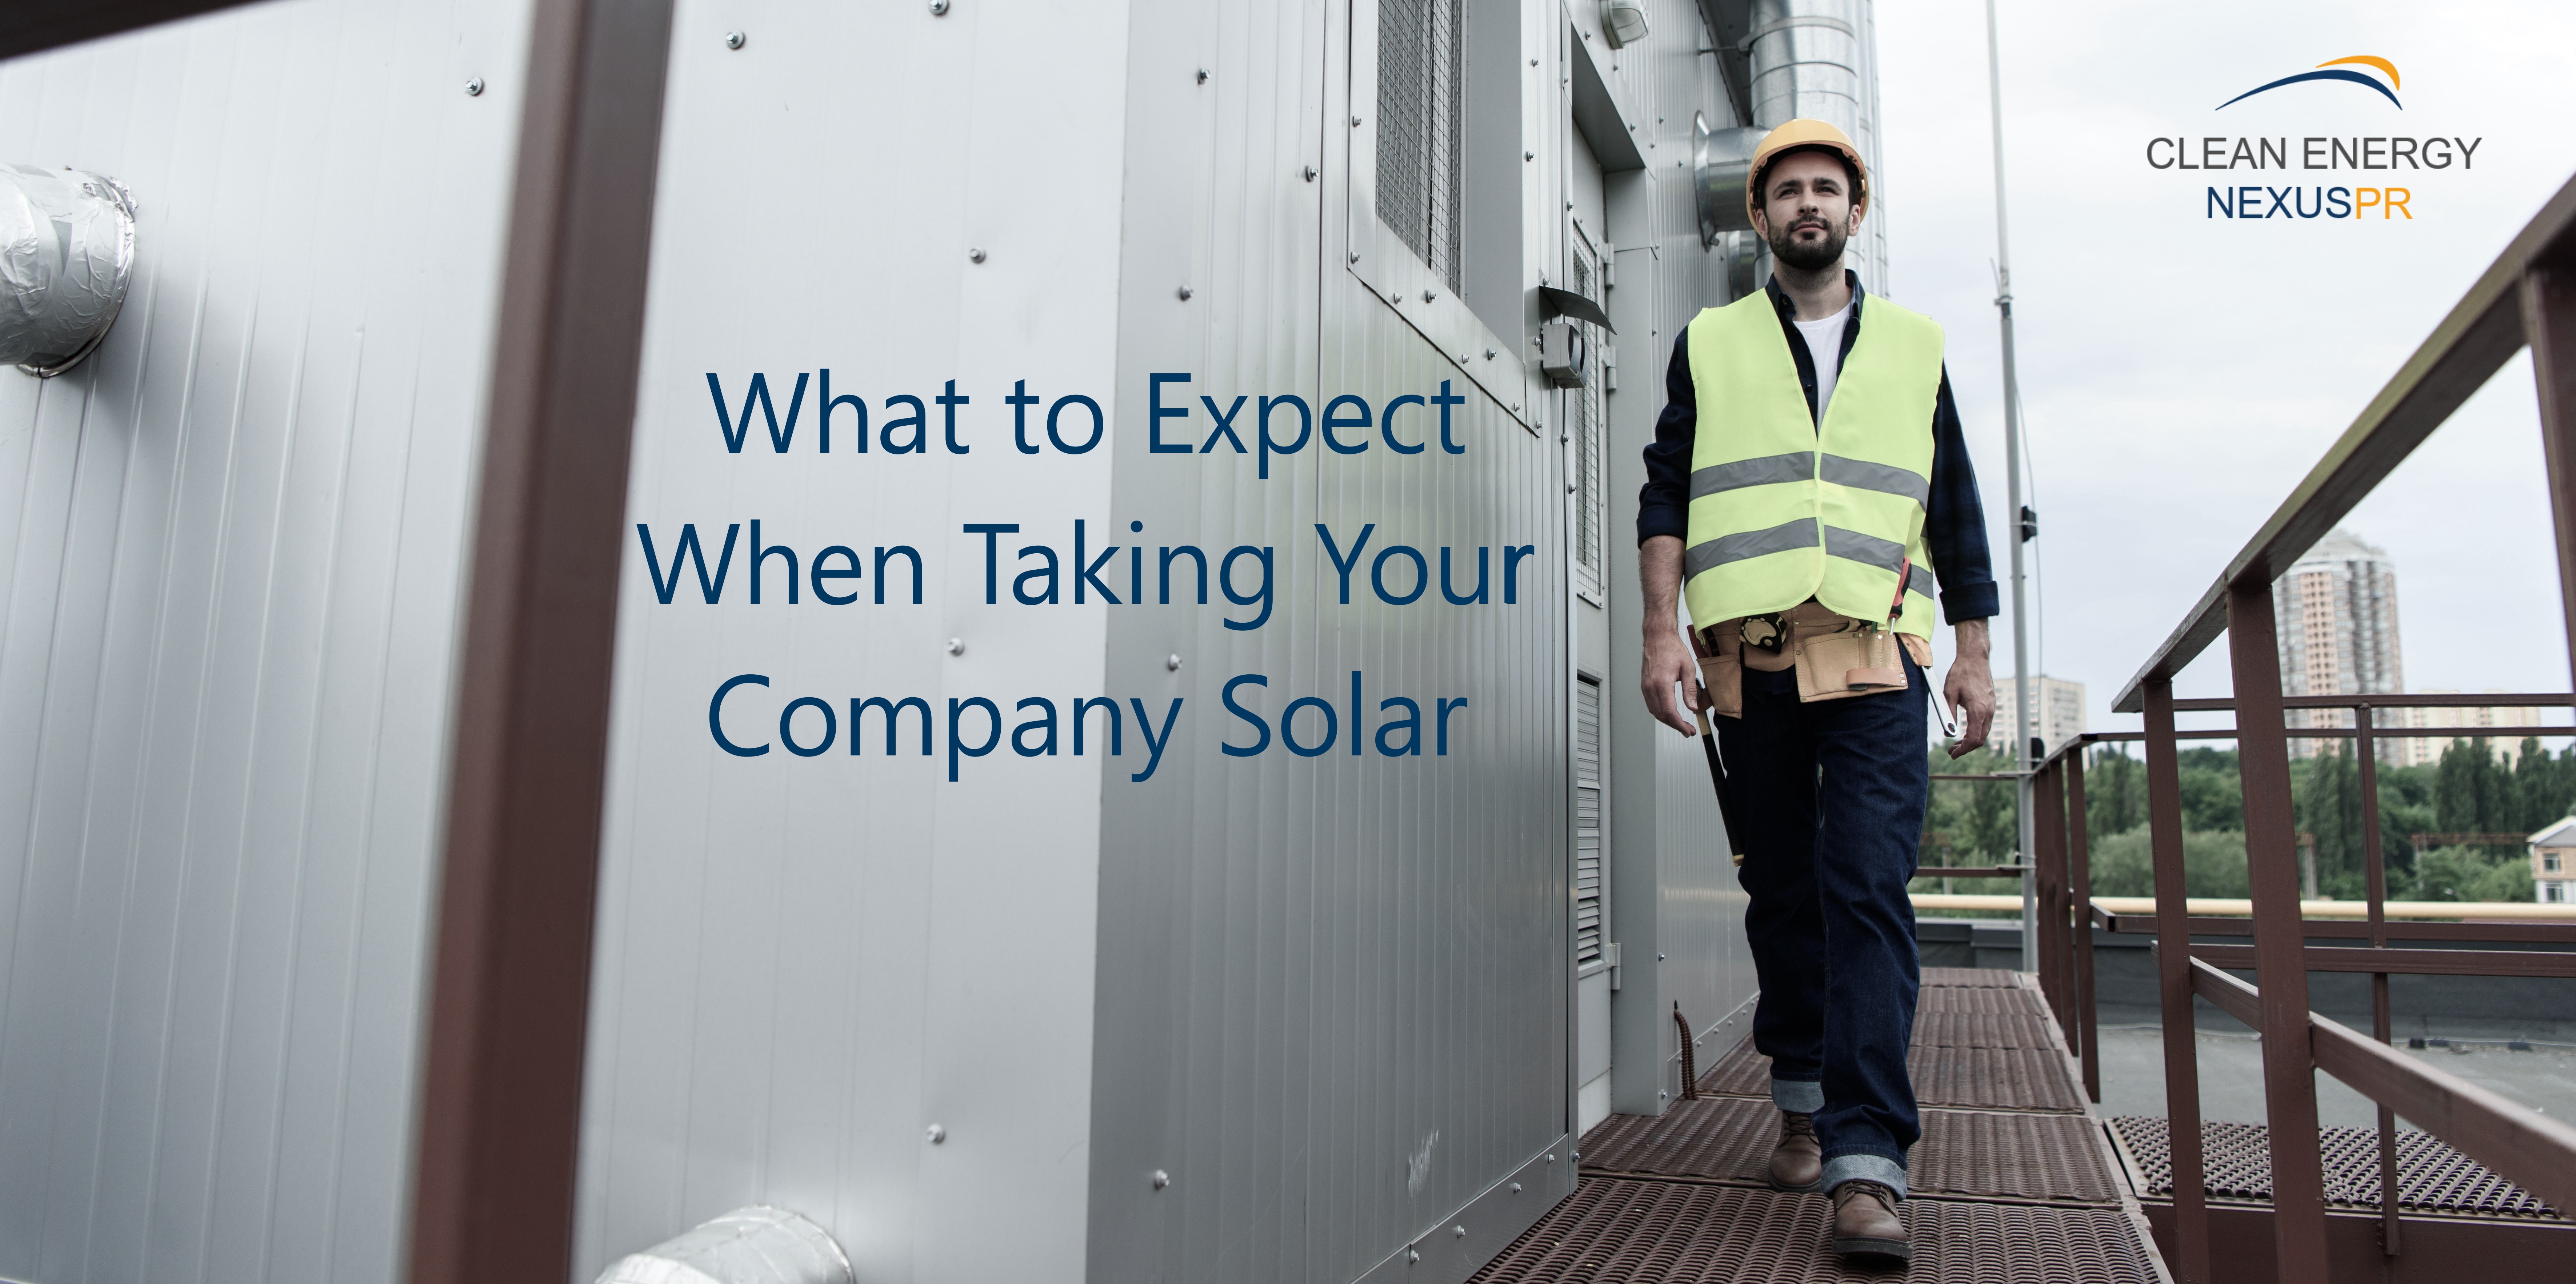 What to Expect When Taking Your Company Solar